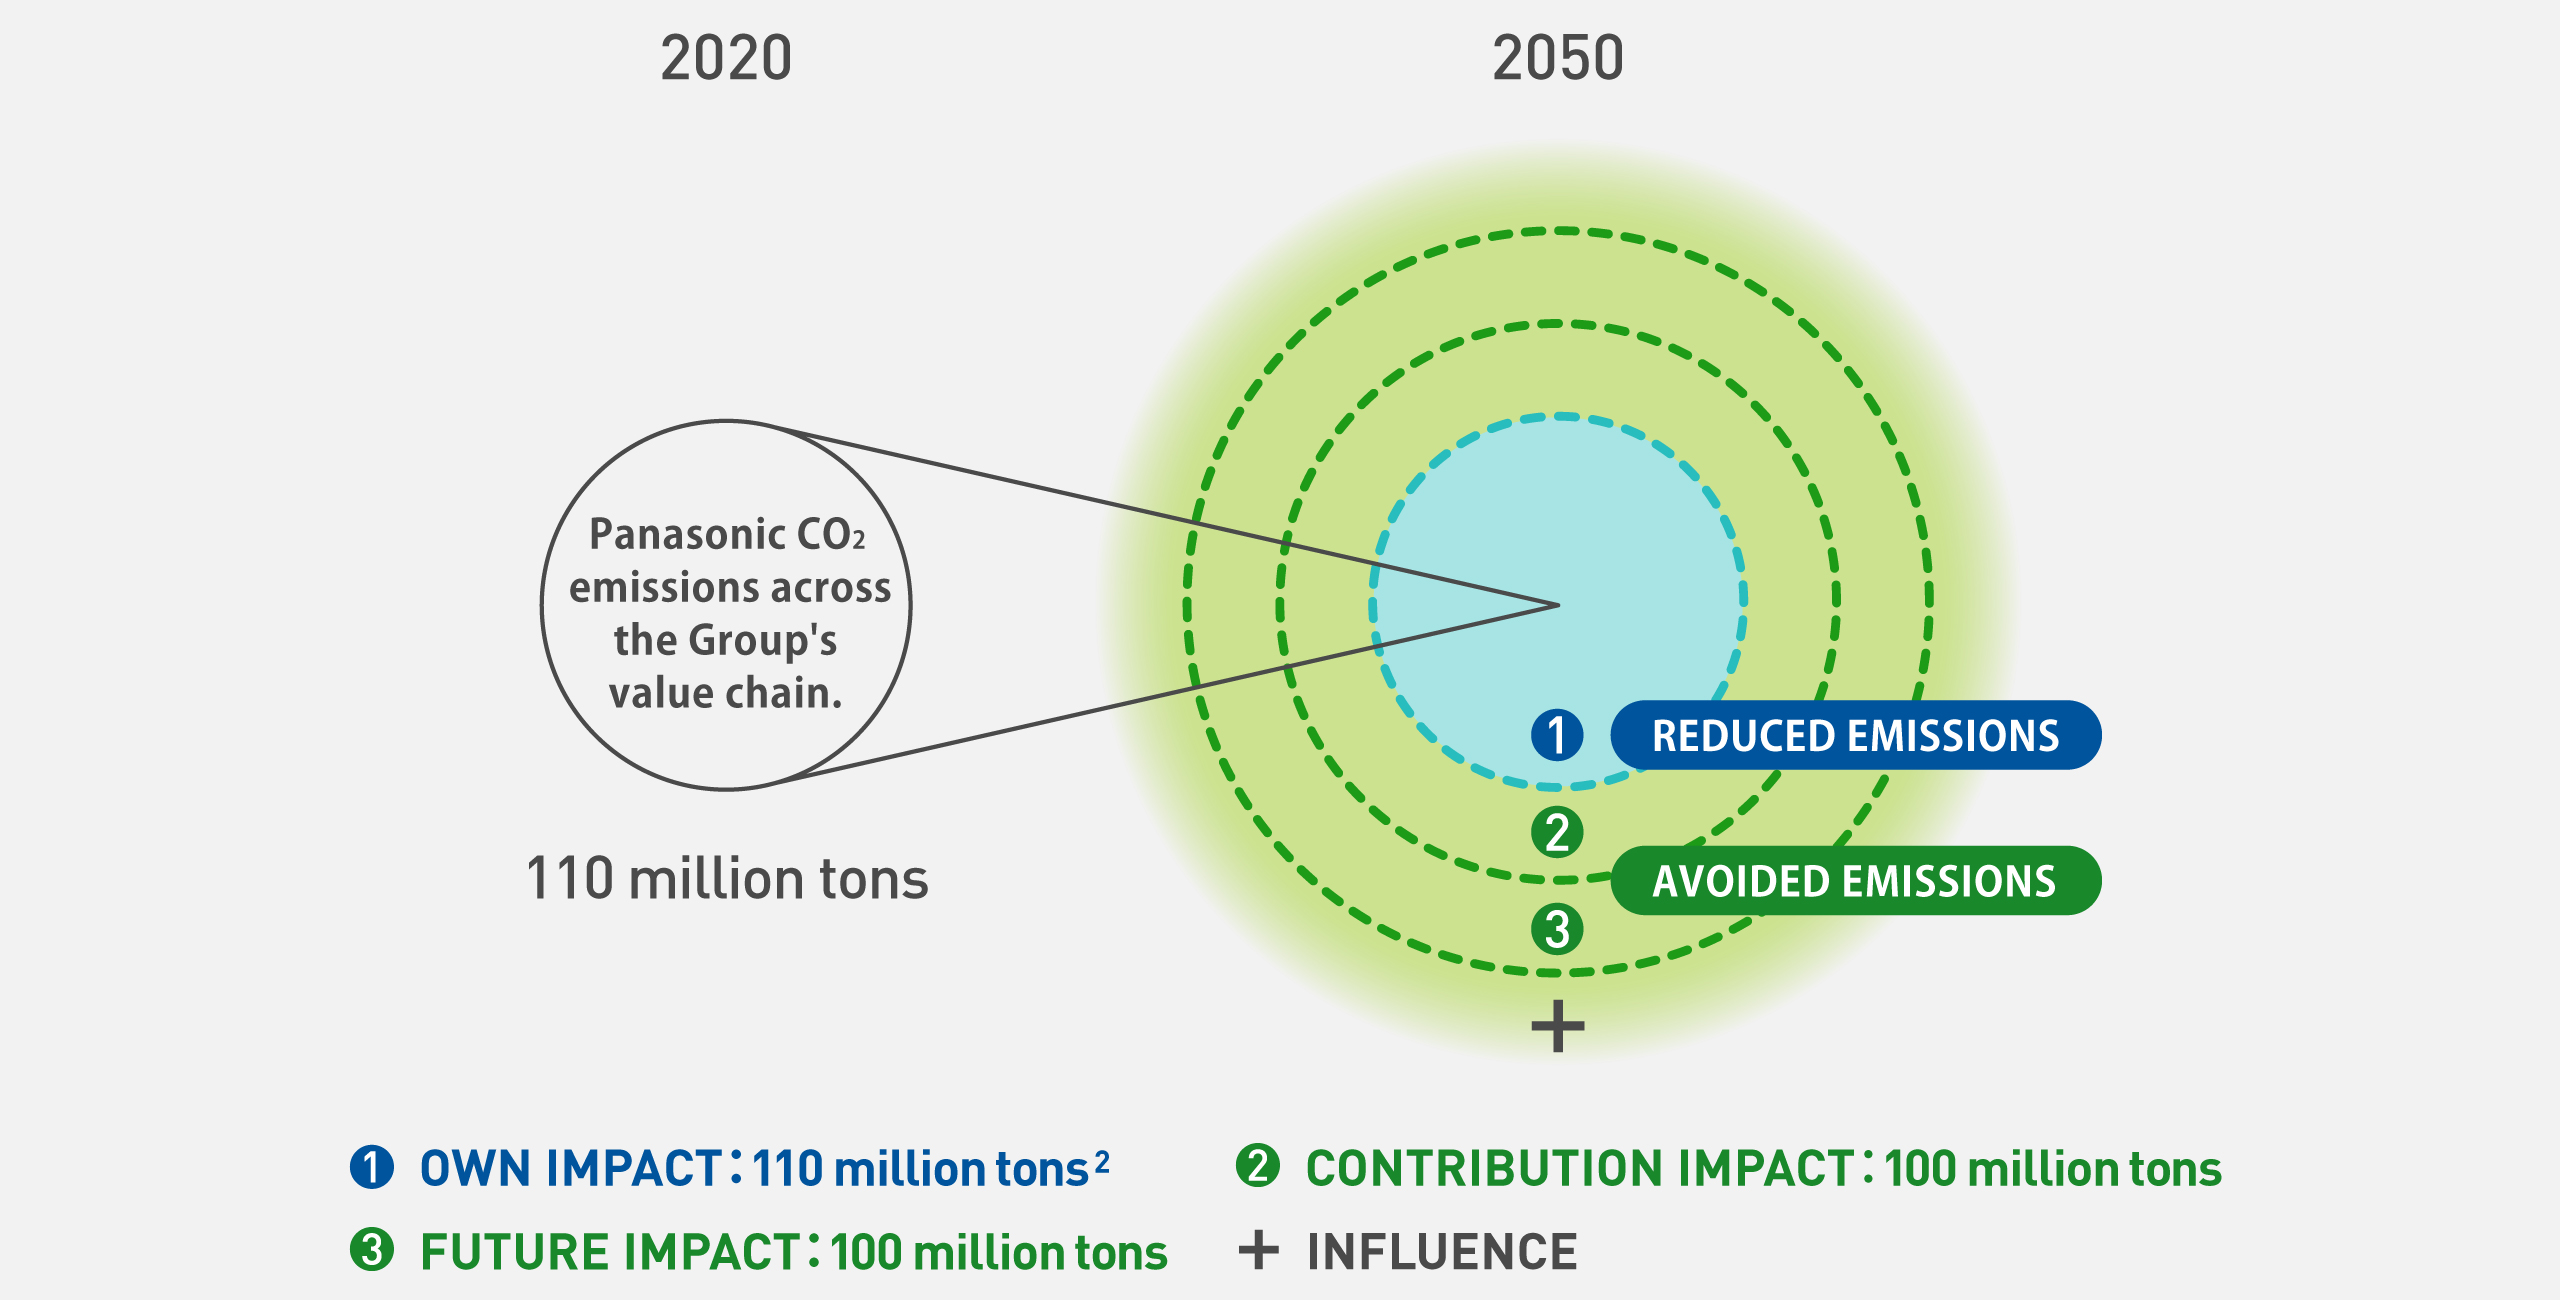 Conceptual diagram illustrating the expansion towards carbon neutrality from fiscal year 2021 to 2051. There is a small circle on the left and a large concentric circle with three layers on the right. The circle on the left represents the CO2 emissions of 110 million tons within our own value chain in fiscal year 2021, while the concentric circle on the right represents the impact of over 300 million tons of CO2 reduction by Panasonic GREEN IMPACT in fiscal year 2051. The concentric circle on the right is divided into OWN IMPACT, with the central circle representing it, CONTRIBUTION IMPACT with two layers, and FUTURE IMPACT with three layers. Additionally, there is a +INFLUENCE spreading outside the three concentric circles. OWN IMPACT aims for a reduction of 110 million tons of emissions, while CONTRIBUTION IMPACT and FUTURE IMPACT each aim for avoided emissions of 100 million tons.